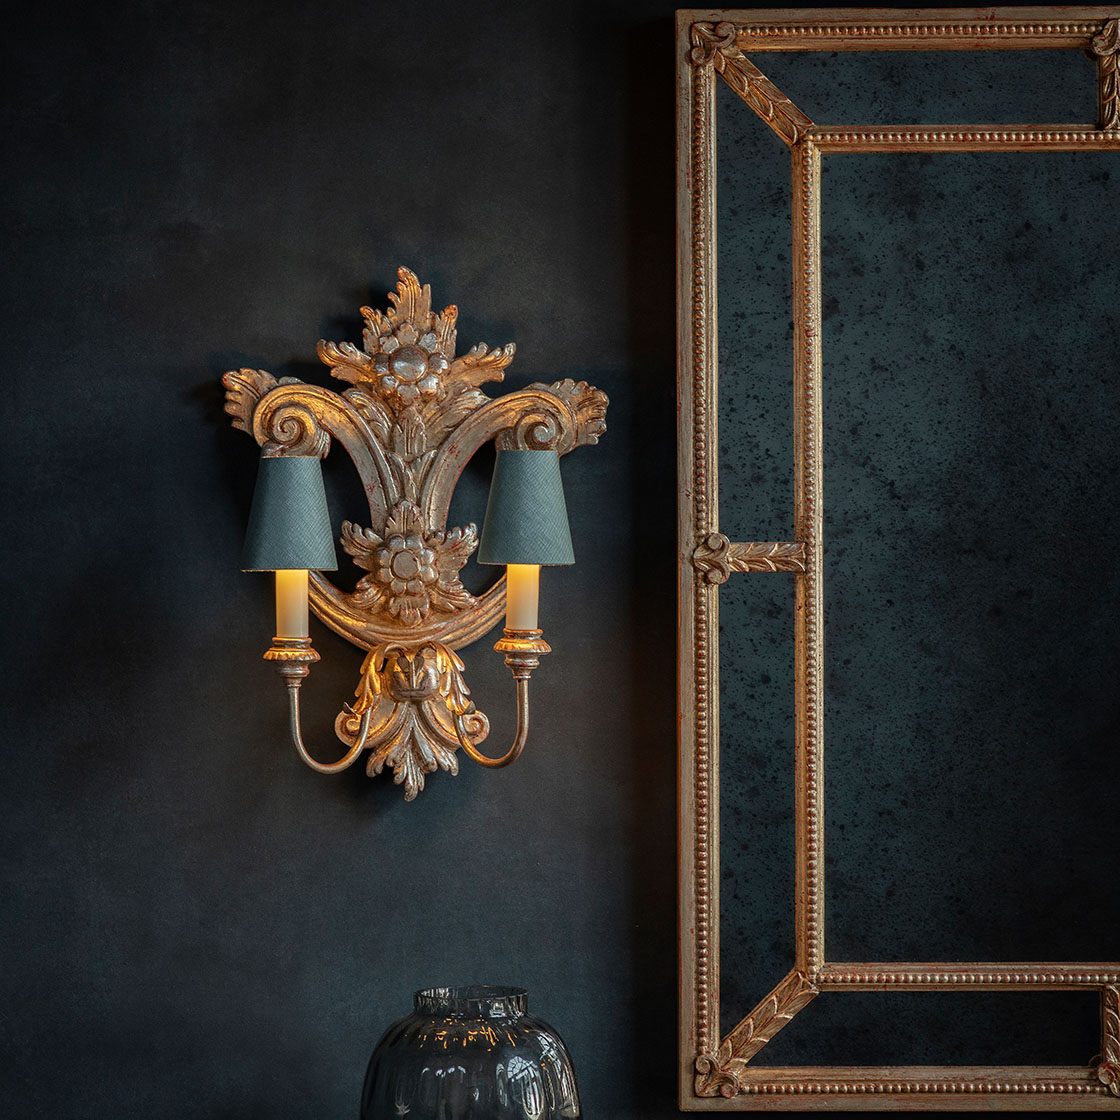 Baroque light in Antiqued silver with Georgian mirror - Beaumont & Fletcher